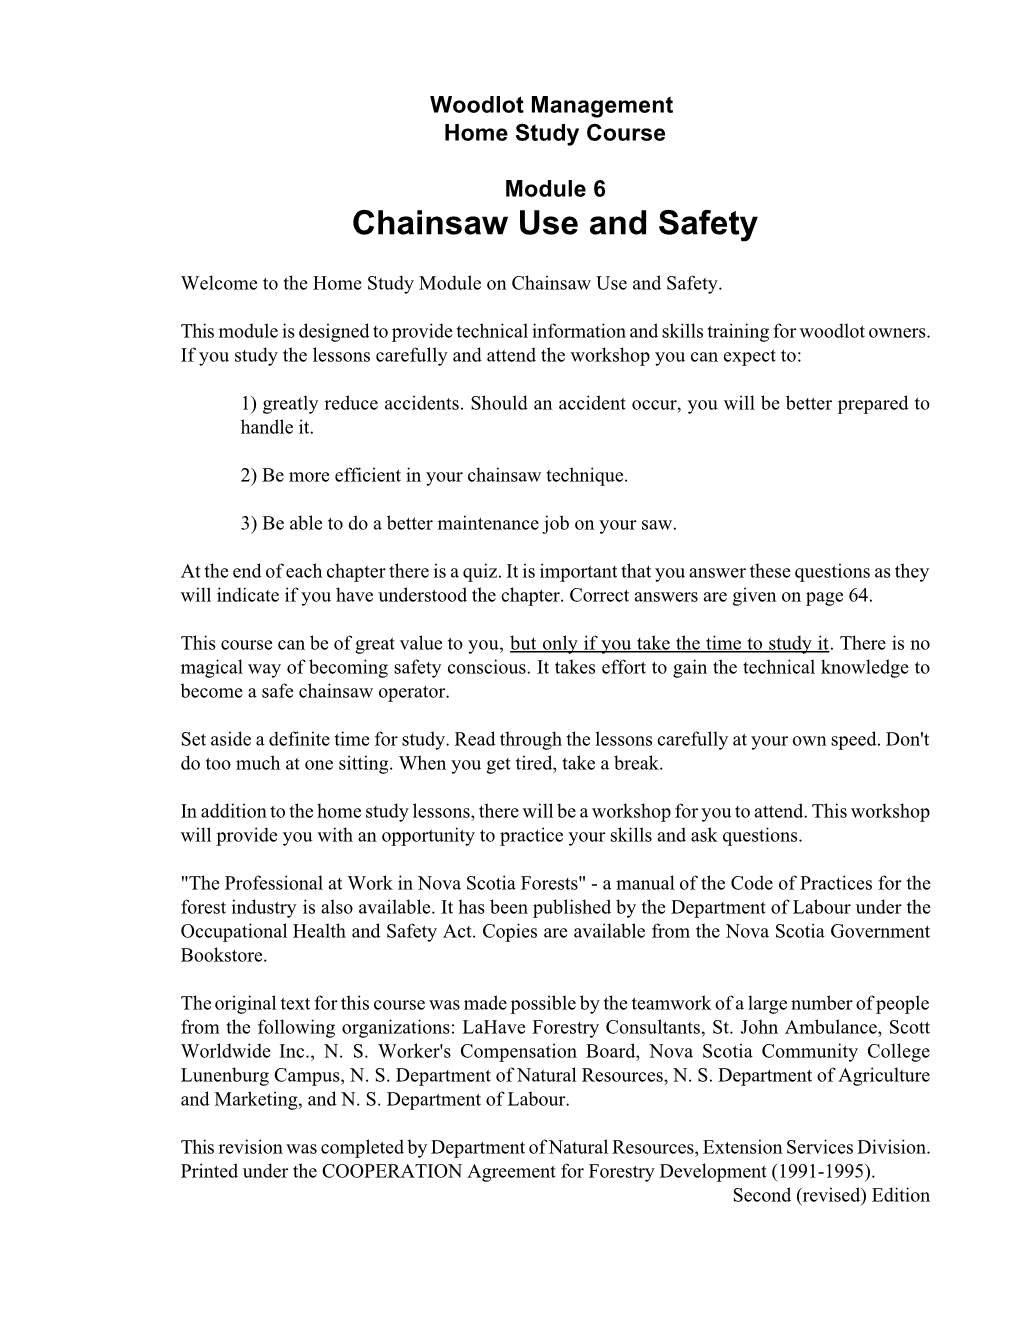 Chainsaw Use and Safety